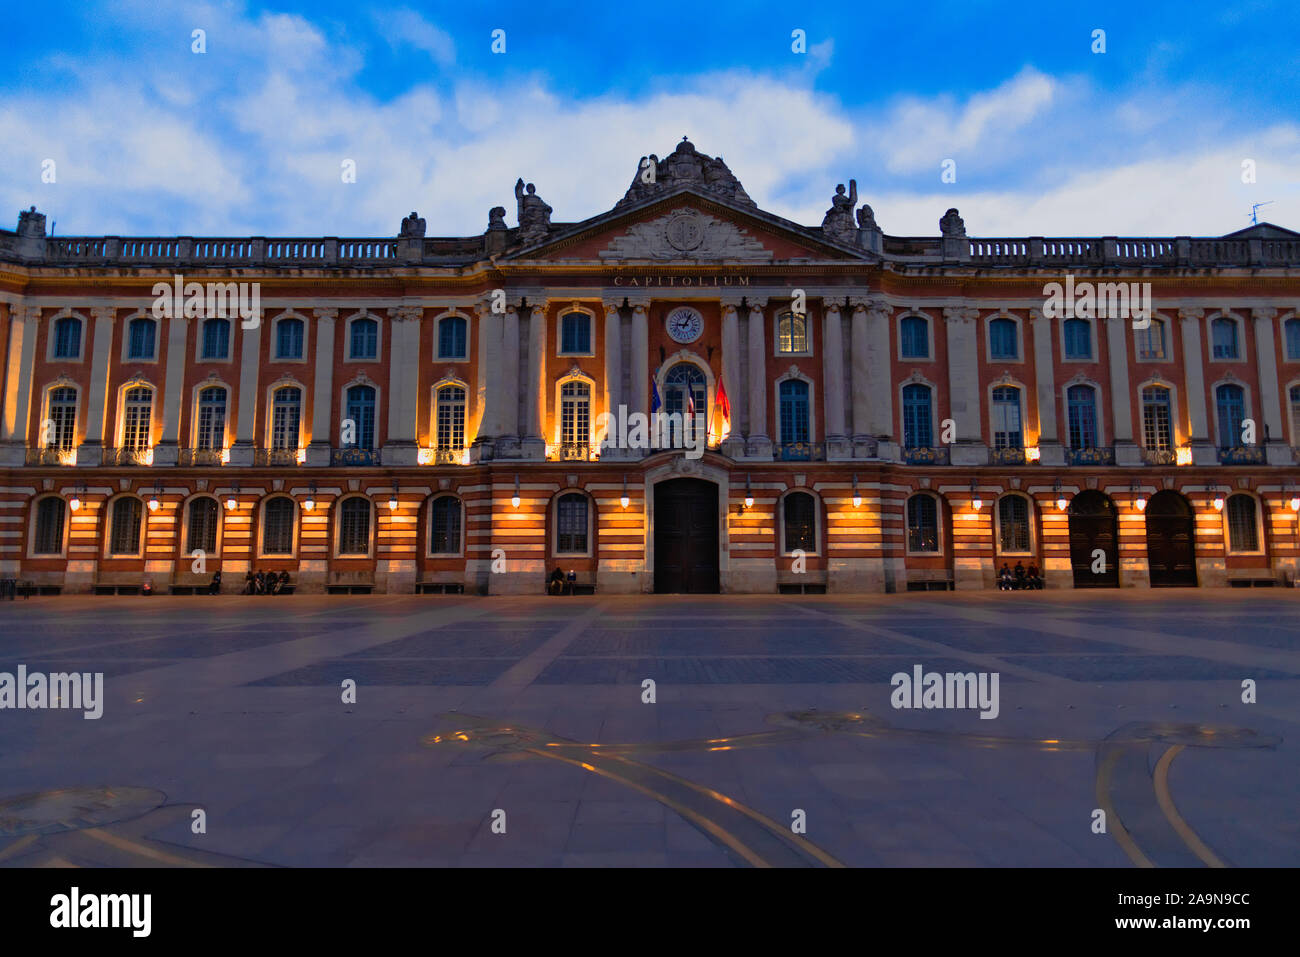 Place du Capitole, city hall of Toulouse, France Stock Photo